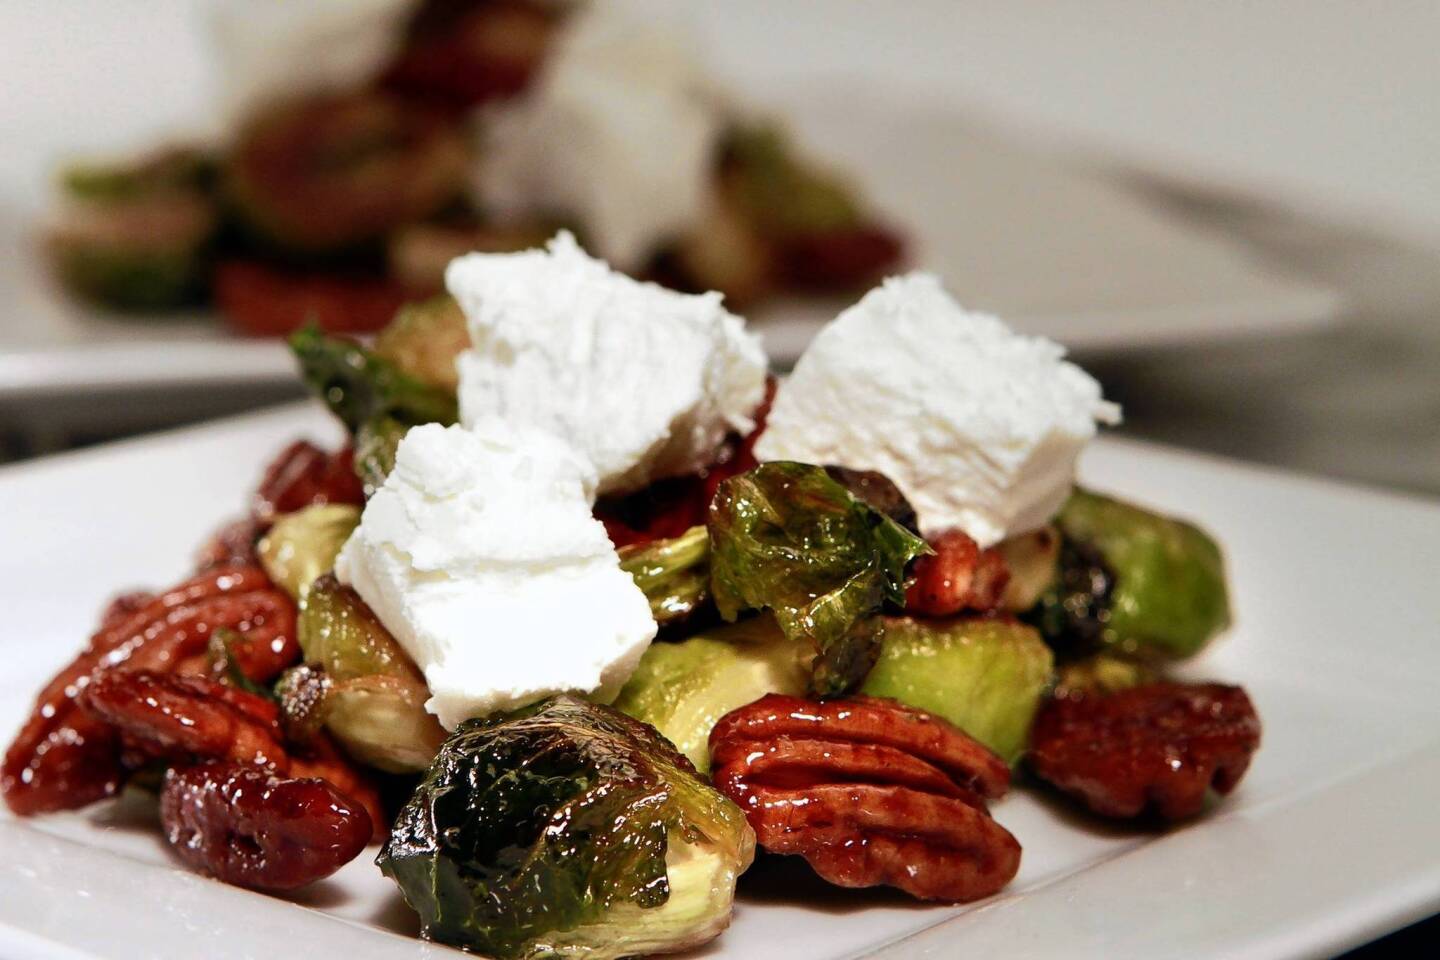 Palazzo Giuseppe's Brussels sprout salad